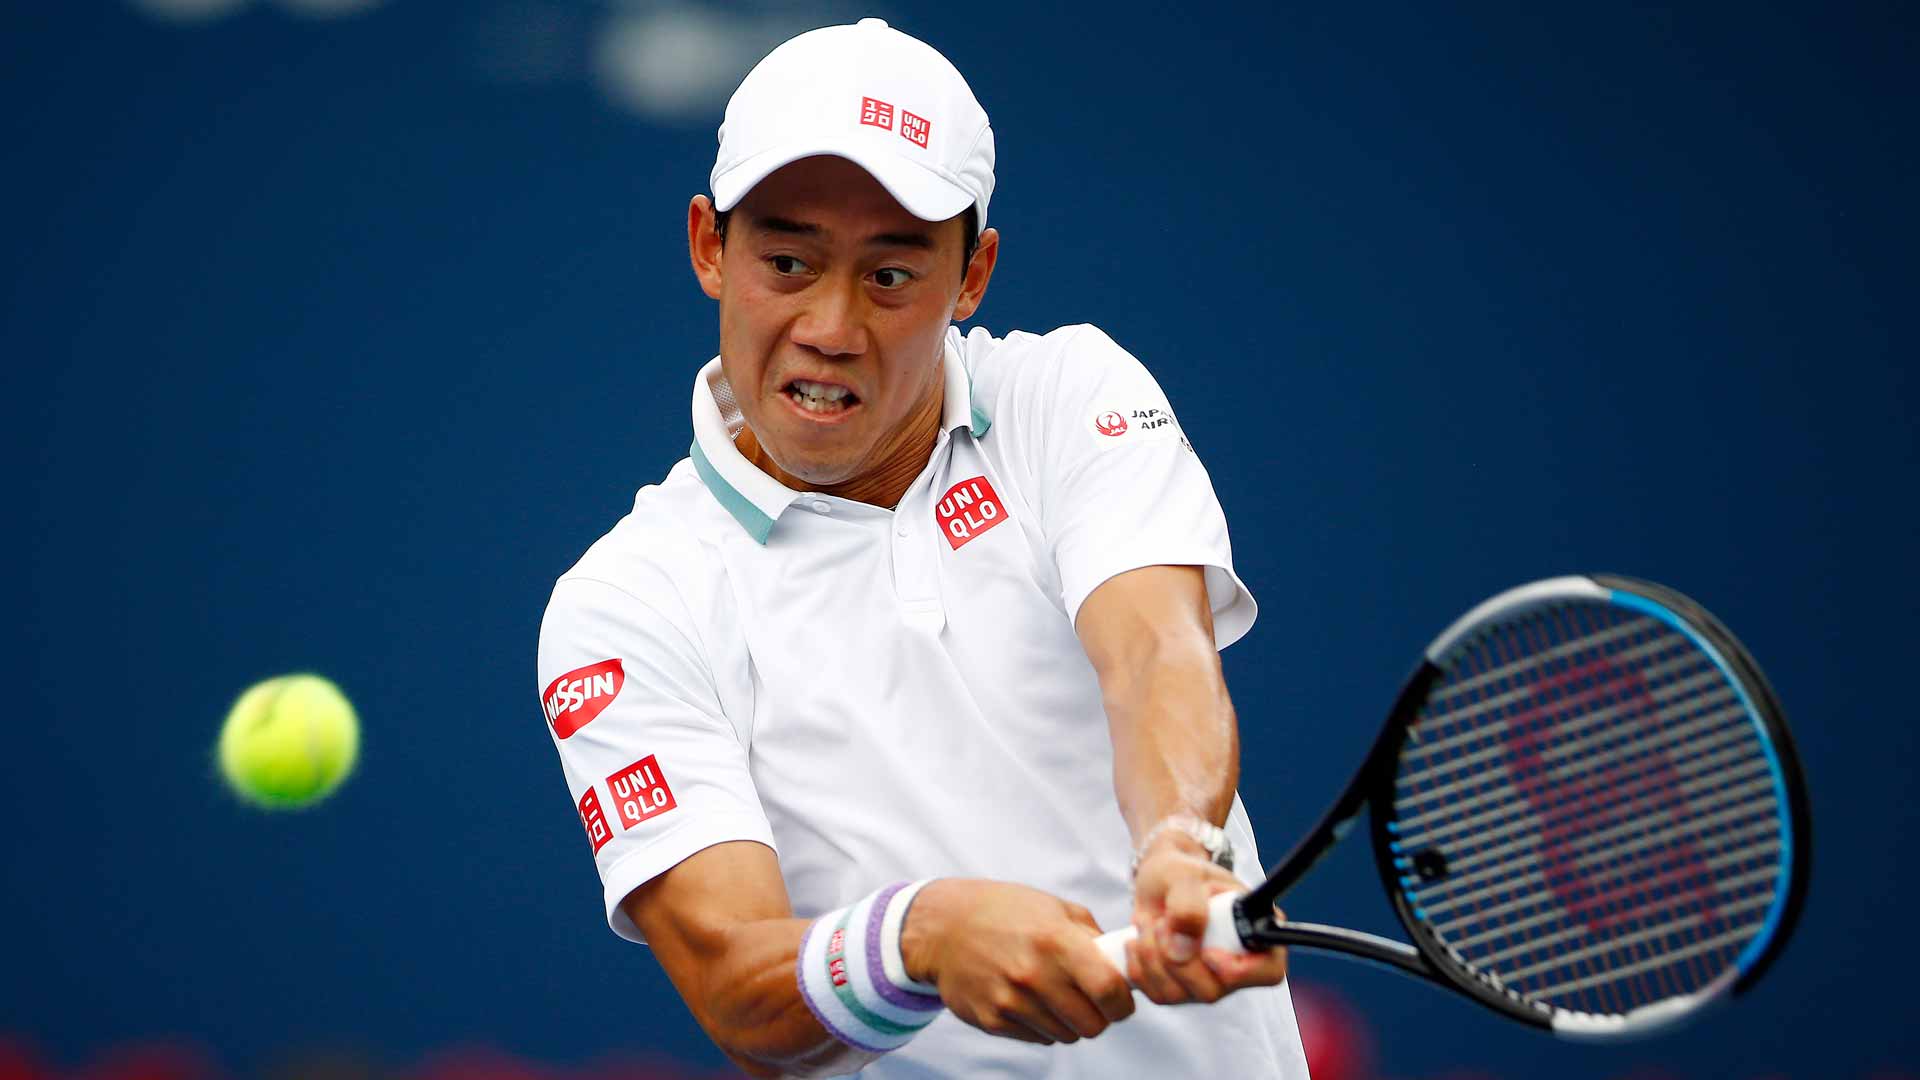 Kei Nishikori will face Christian Langmo in his first match since October 2021.